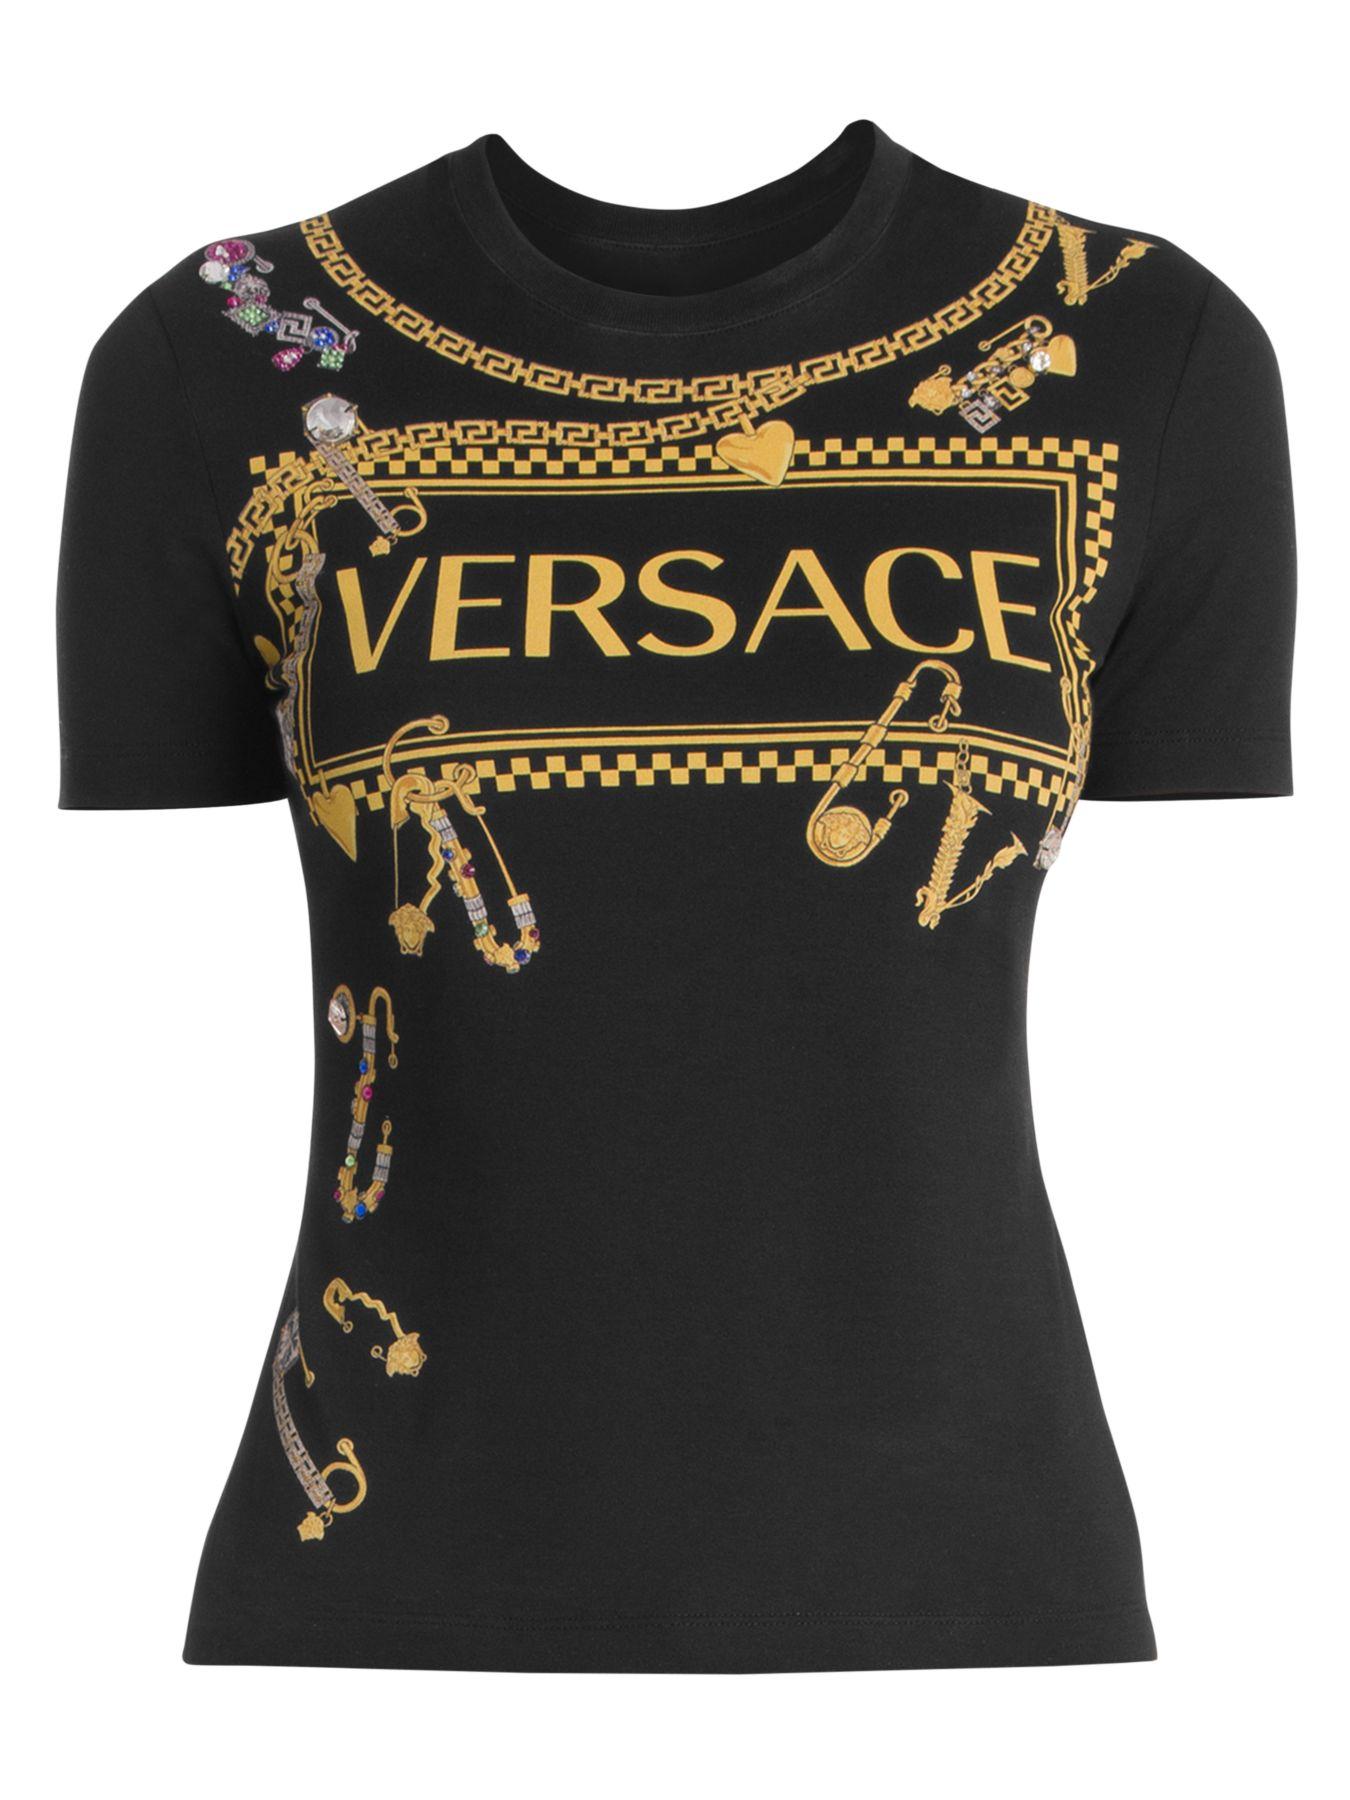 Versace Embellished Cotton Jersey T-shirt in Black - Lyst